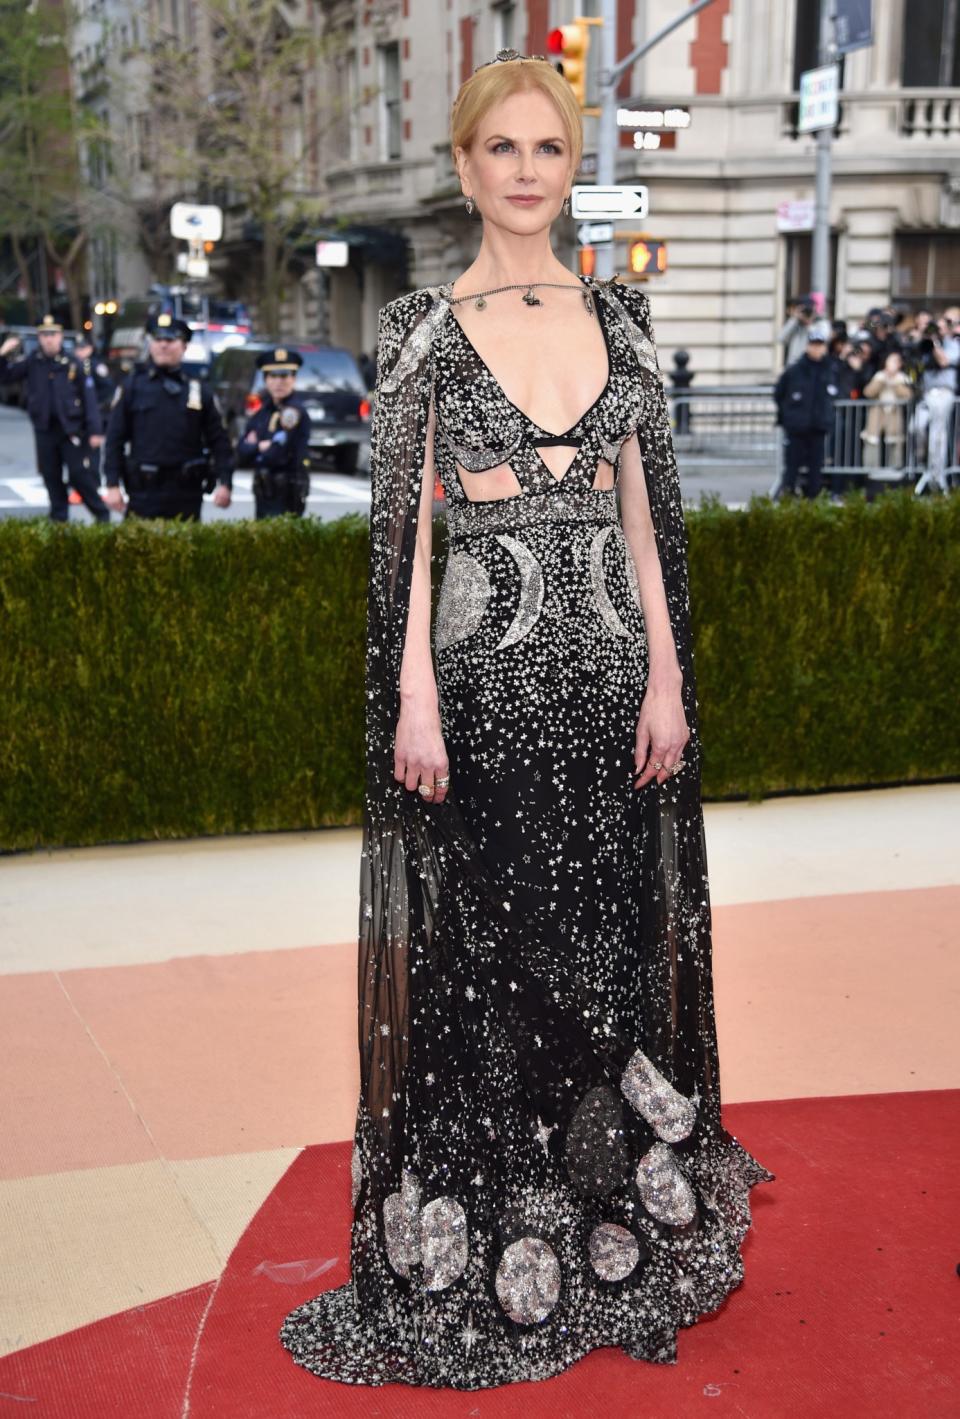 Wearing Alexander McQueen at the ‘Manus x Machina: Fashion In An Age Of Technology’ Costume Institute Gala